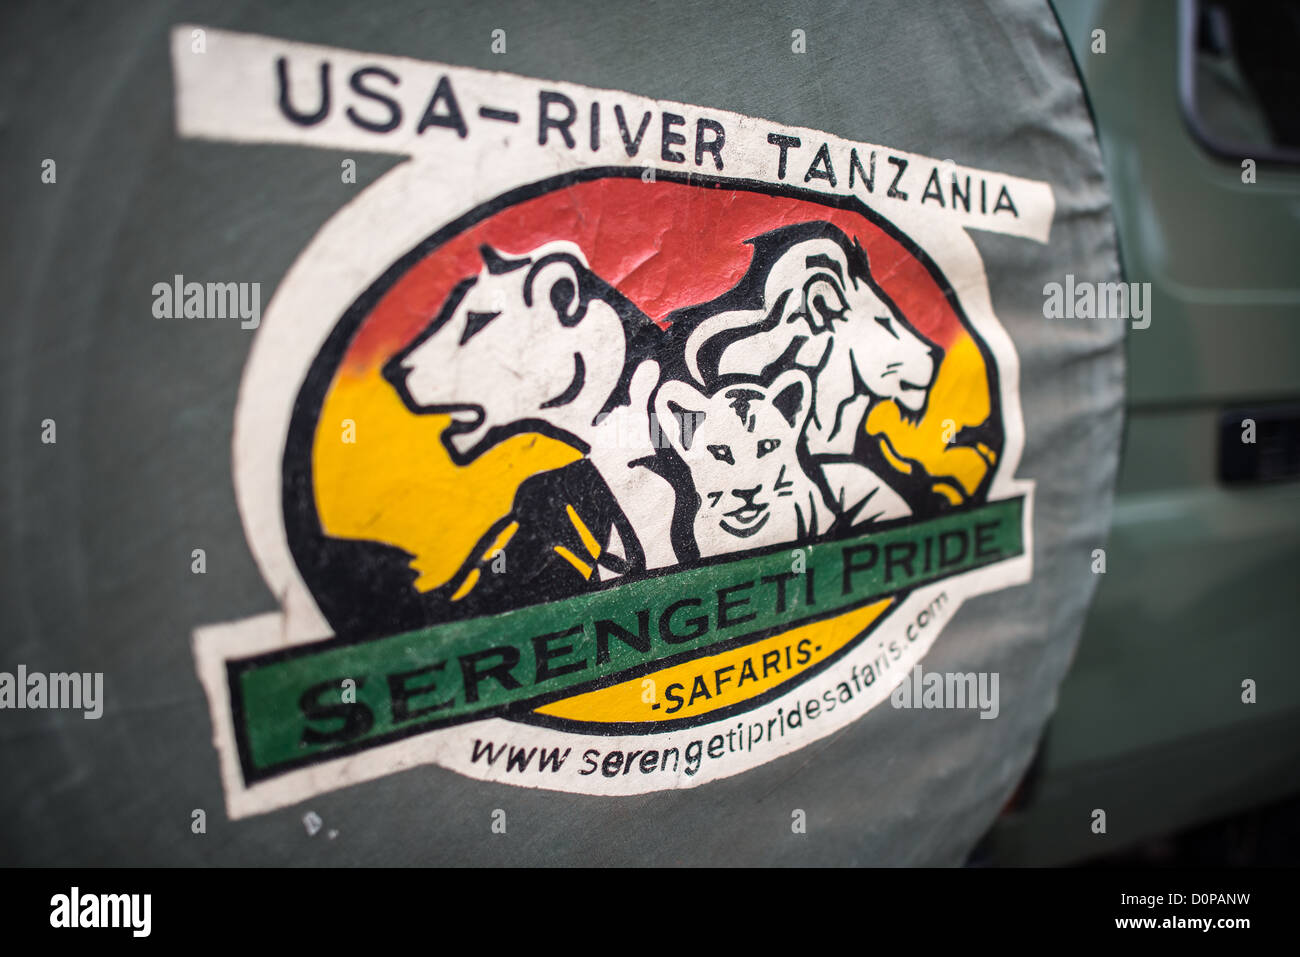 MT KILIMANJARO, Tanzania - The logo of Serengeti Pride, a travel and guide company for Mt Kilimanjaro. The shot is of the tire cover on the back of one of their Toyota Landcruisers. Stock Photo